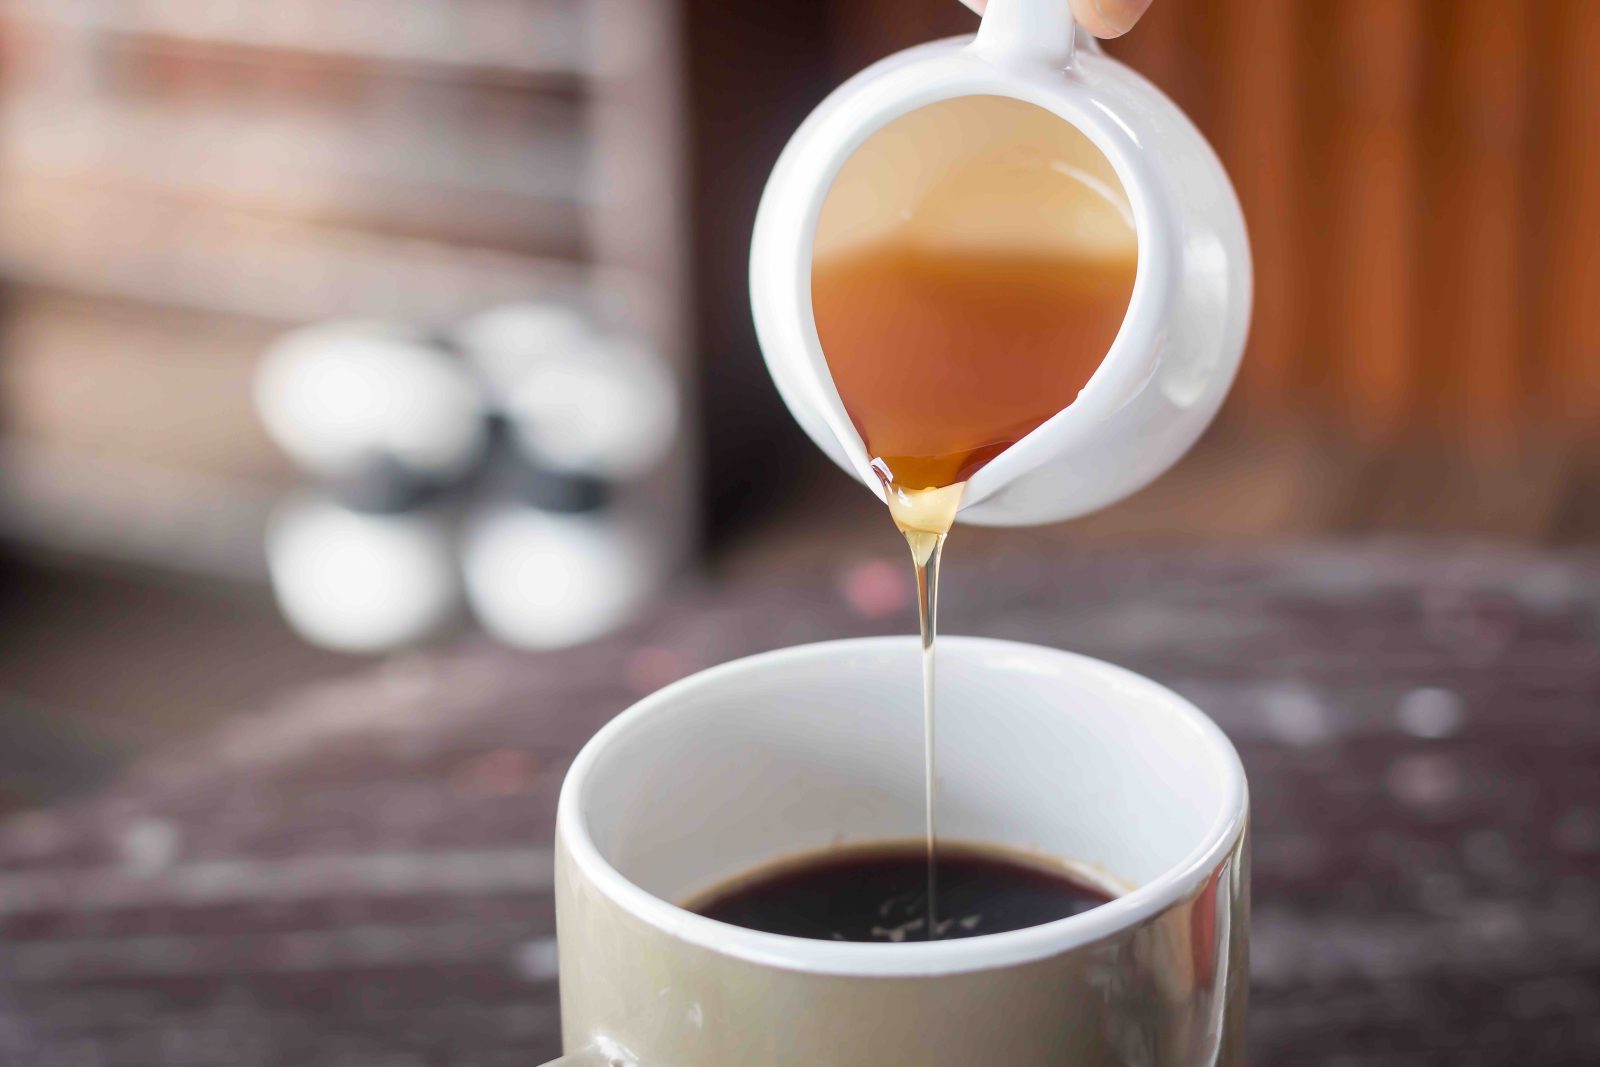 How To Make Black Coffee With Honey for Weight Loss